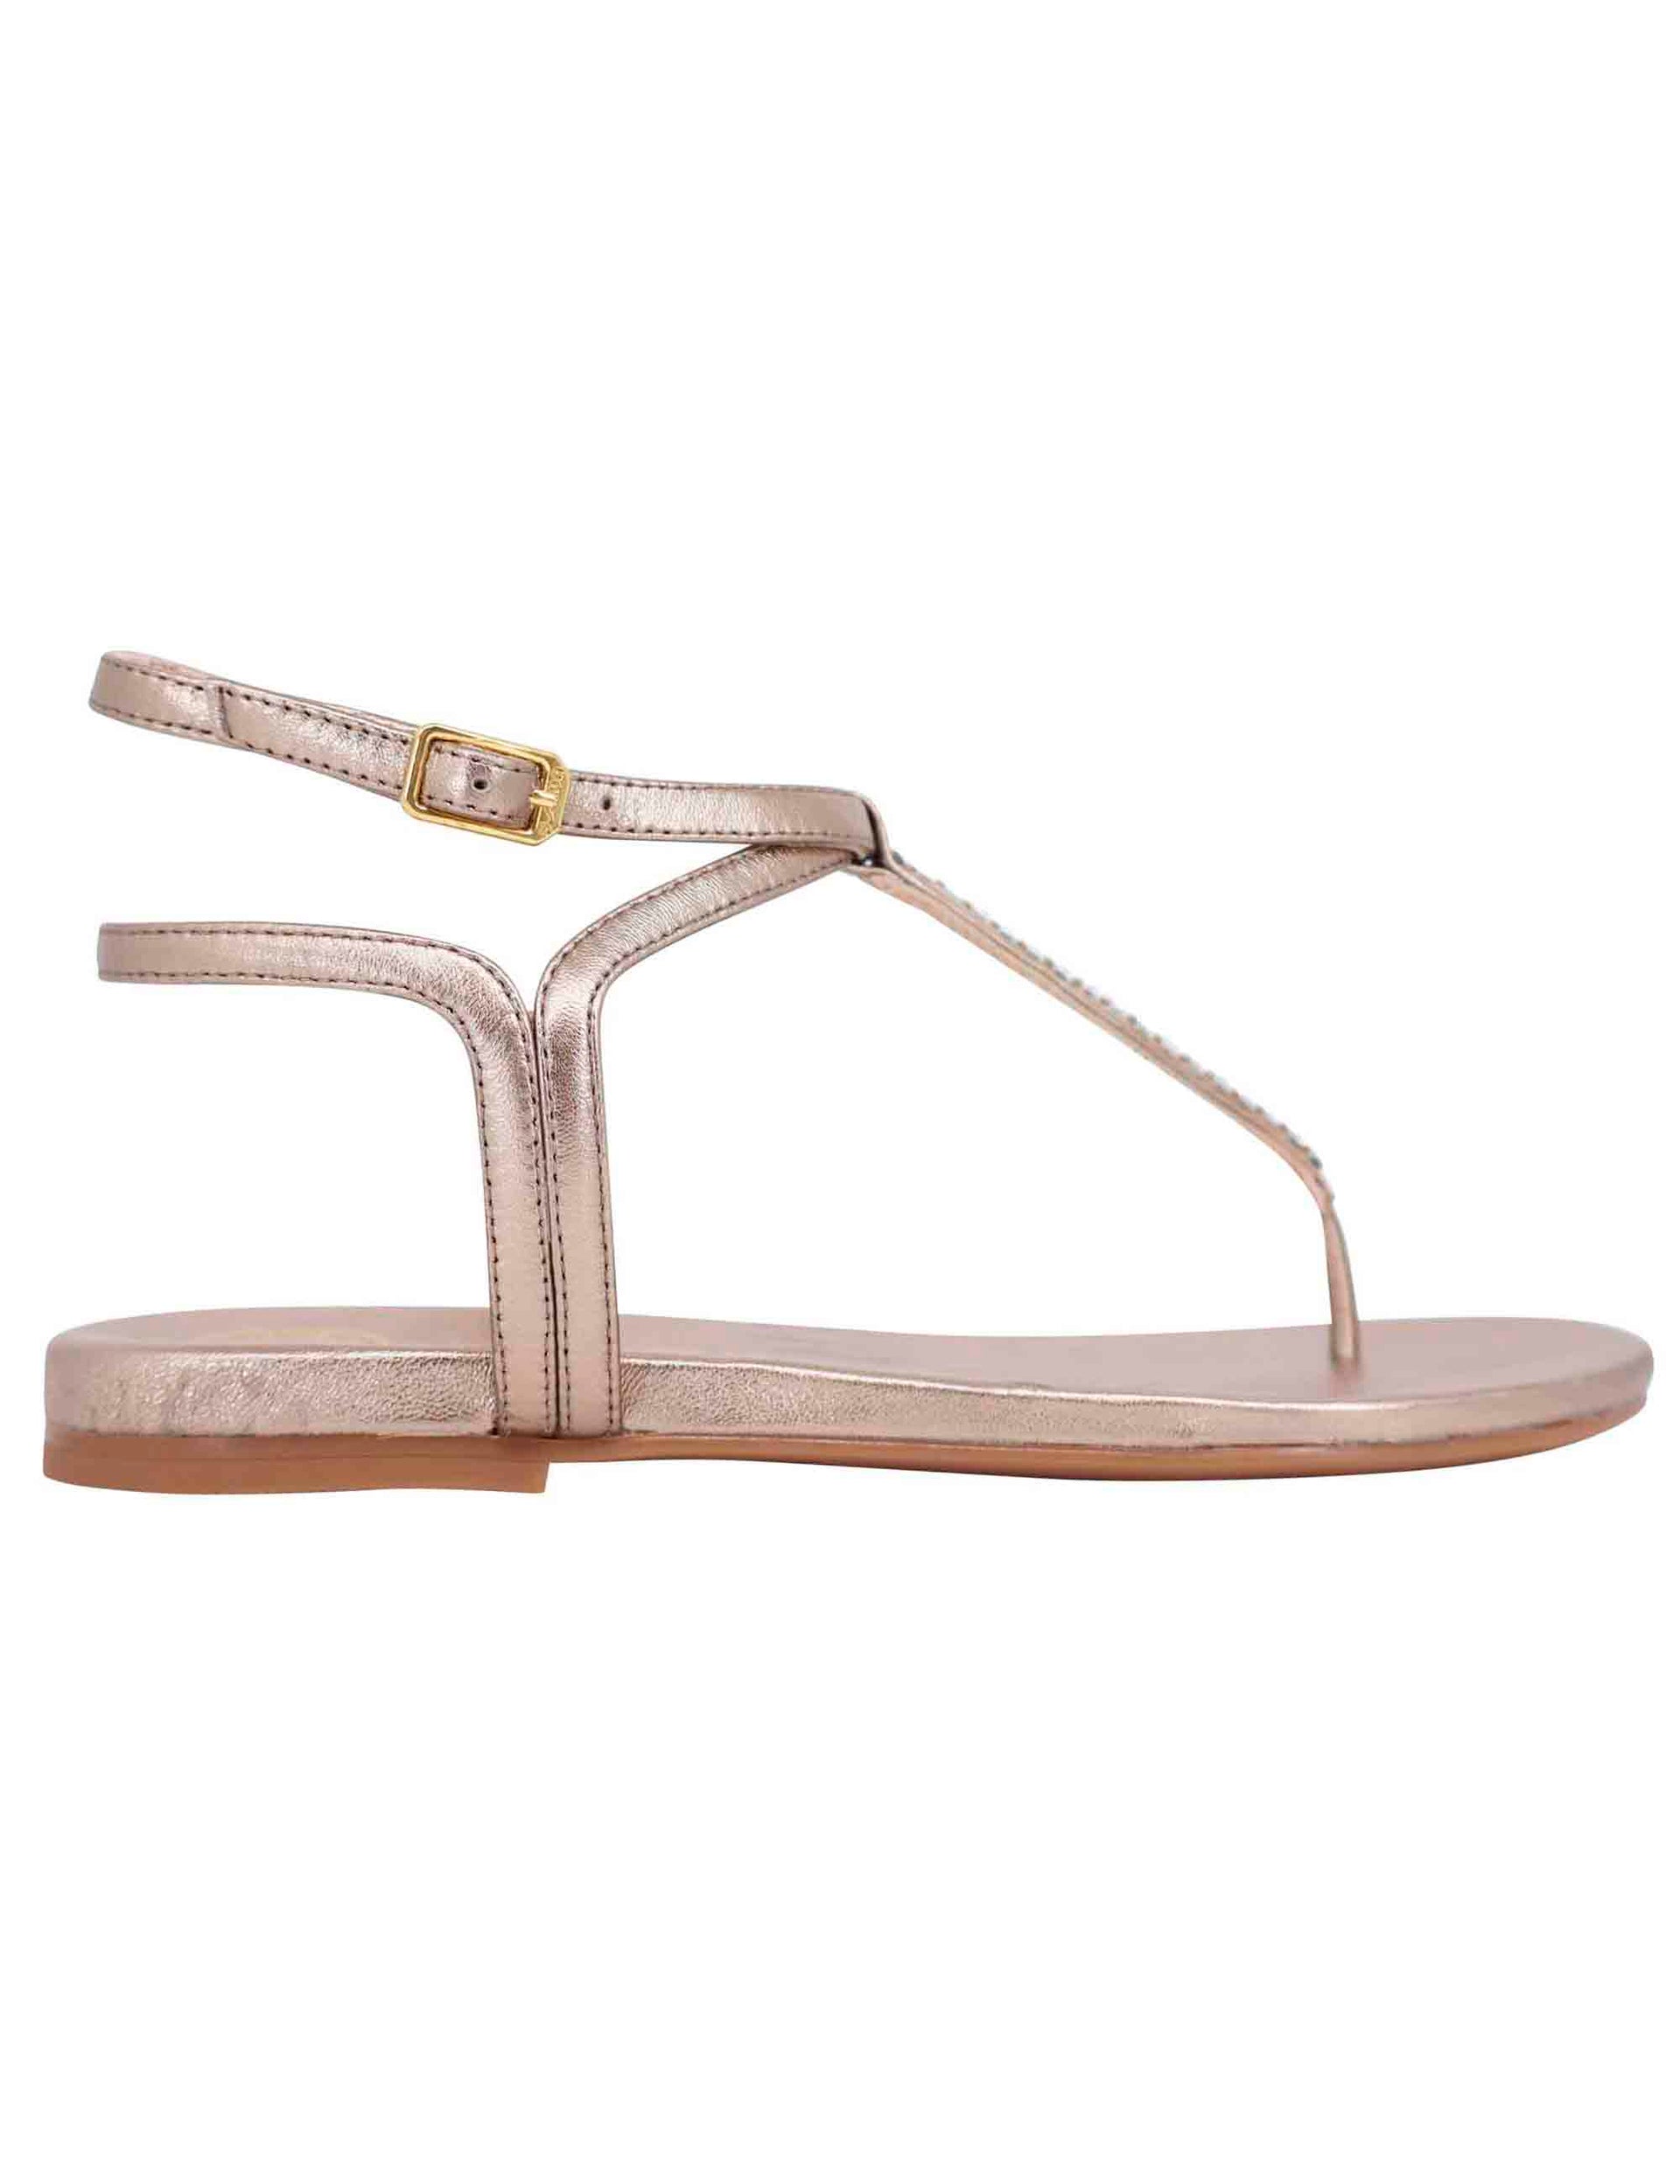 Women's flat flip-flop sandals in bronze laminated leather with double ankle strap